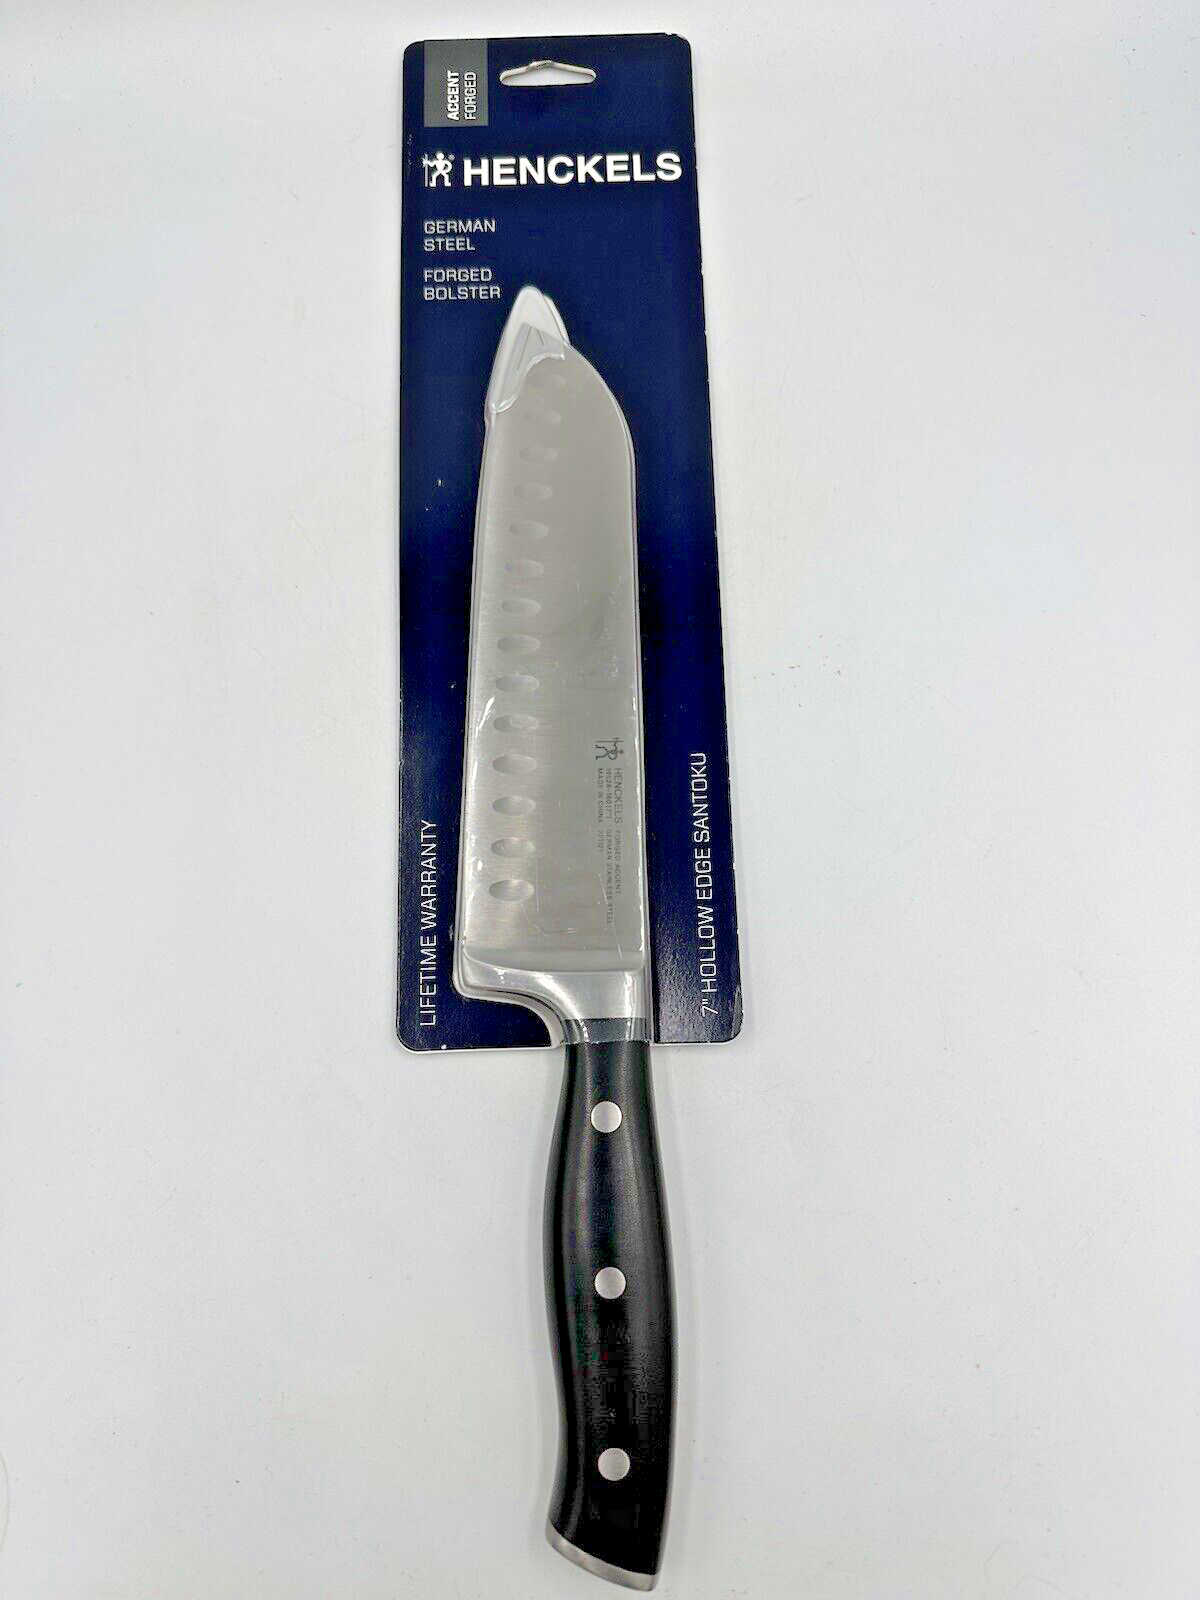 Henckels Forged Accent 7" Hollow Edge Santoku Kitchen Knife- BRAND NEW - $25.15